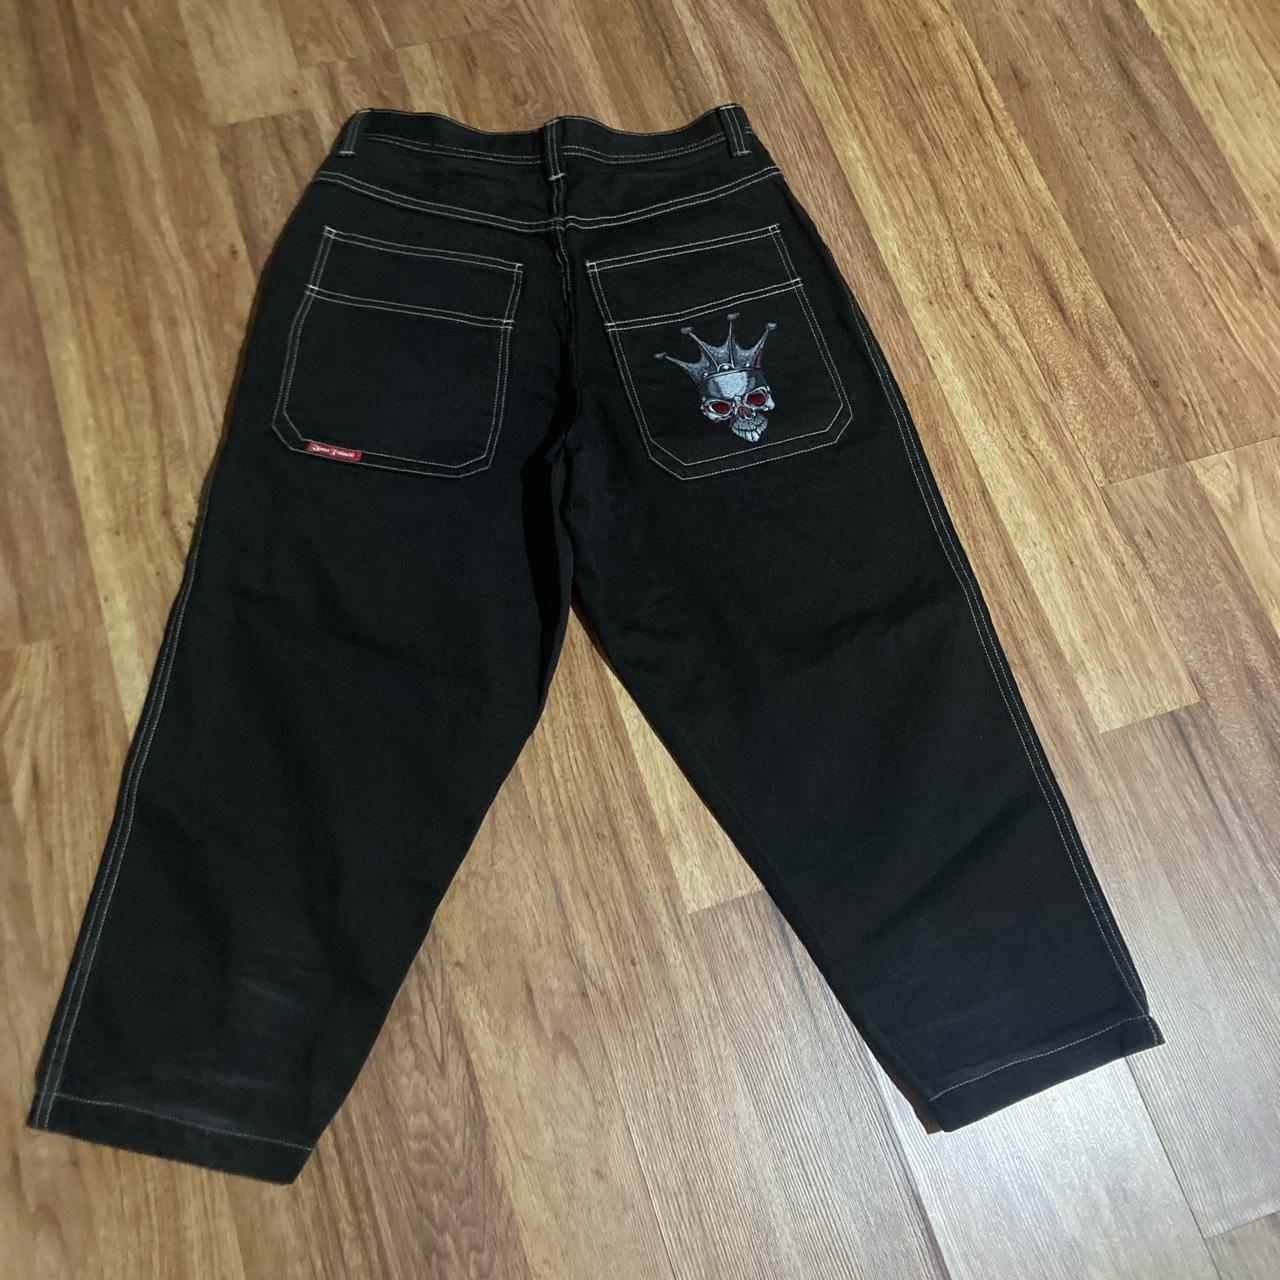 Sexy pair of RARE JNCO TRIBAL JEANS in black with... - Depop